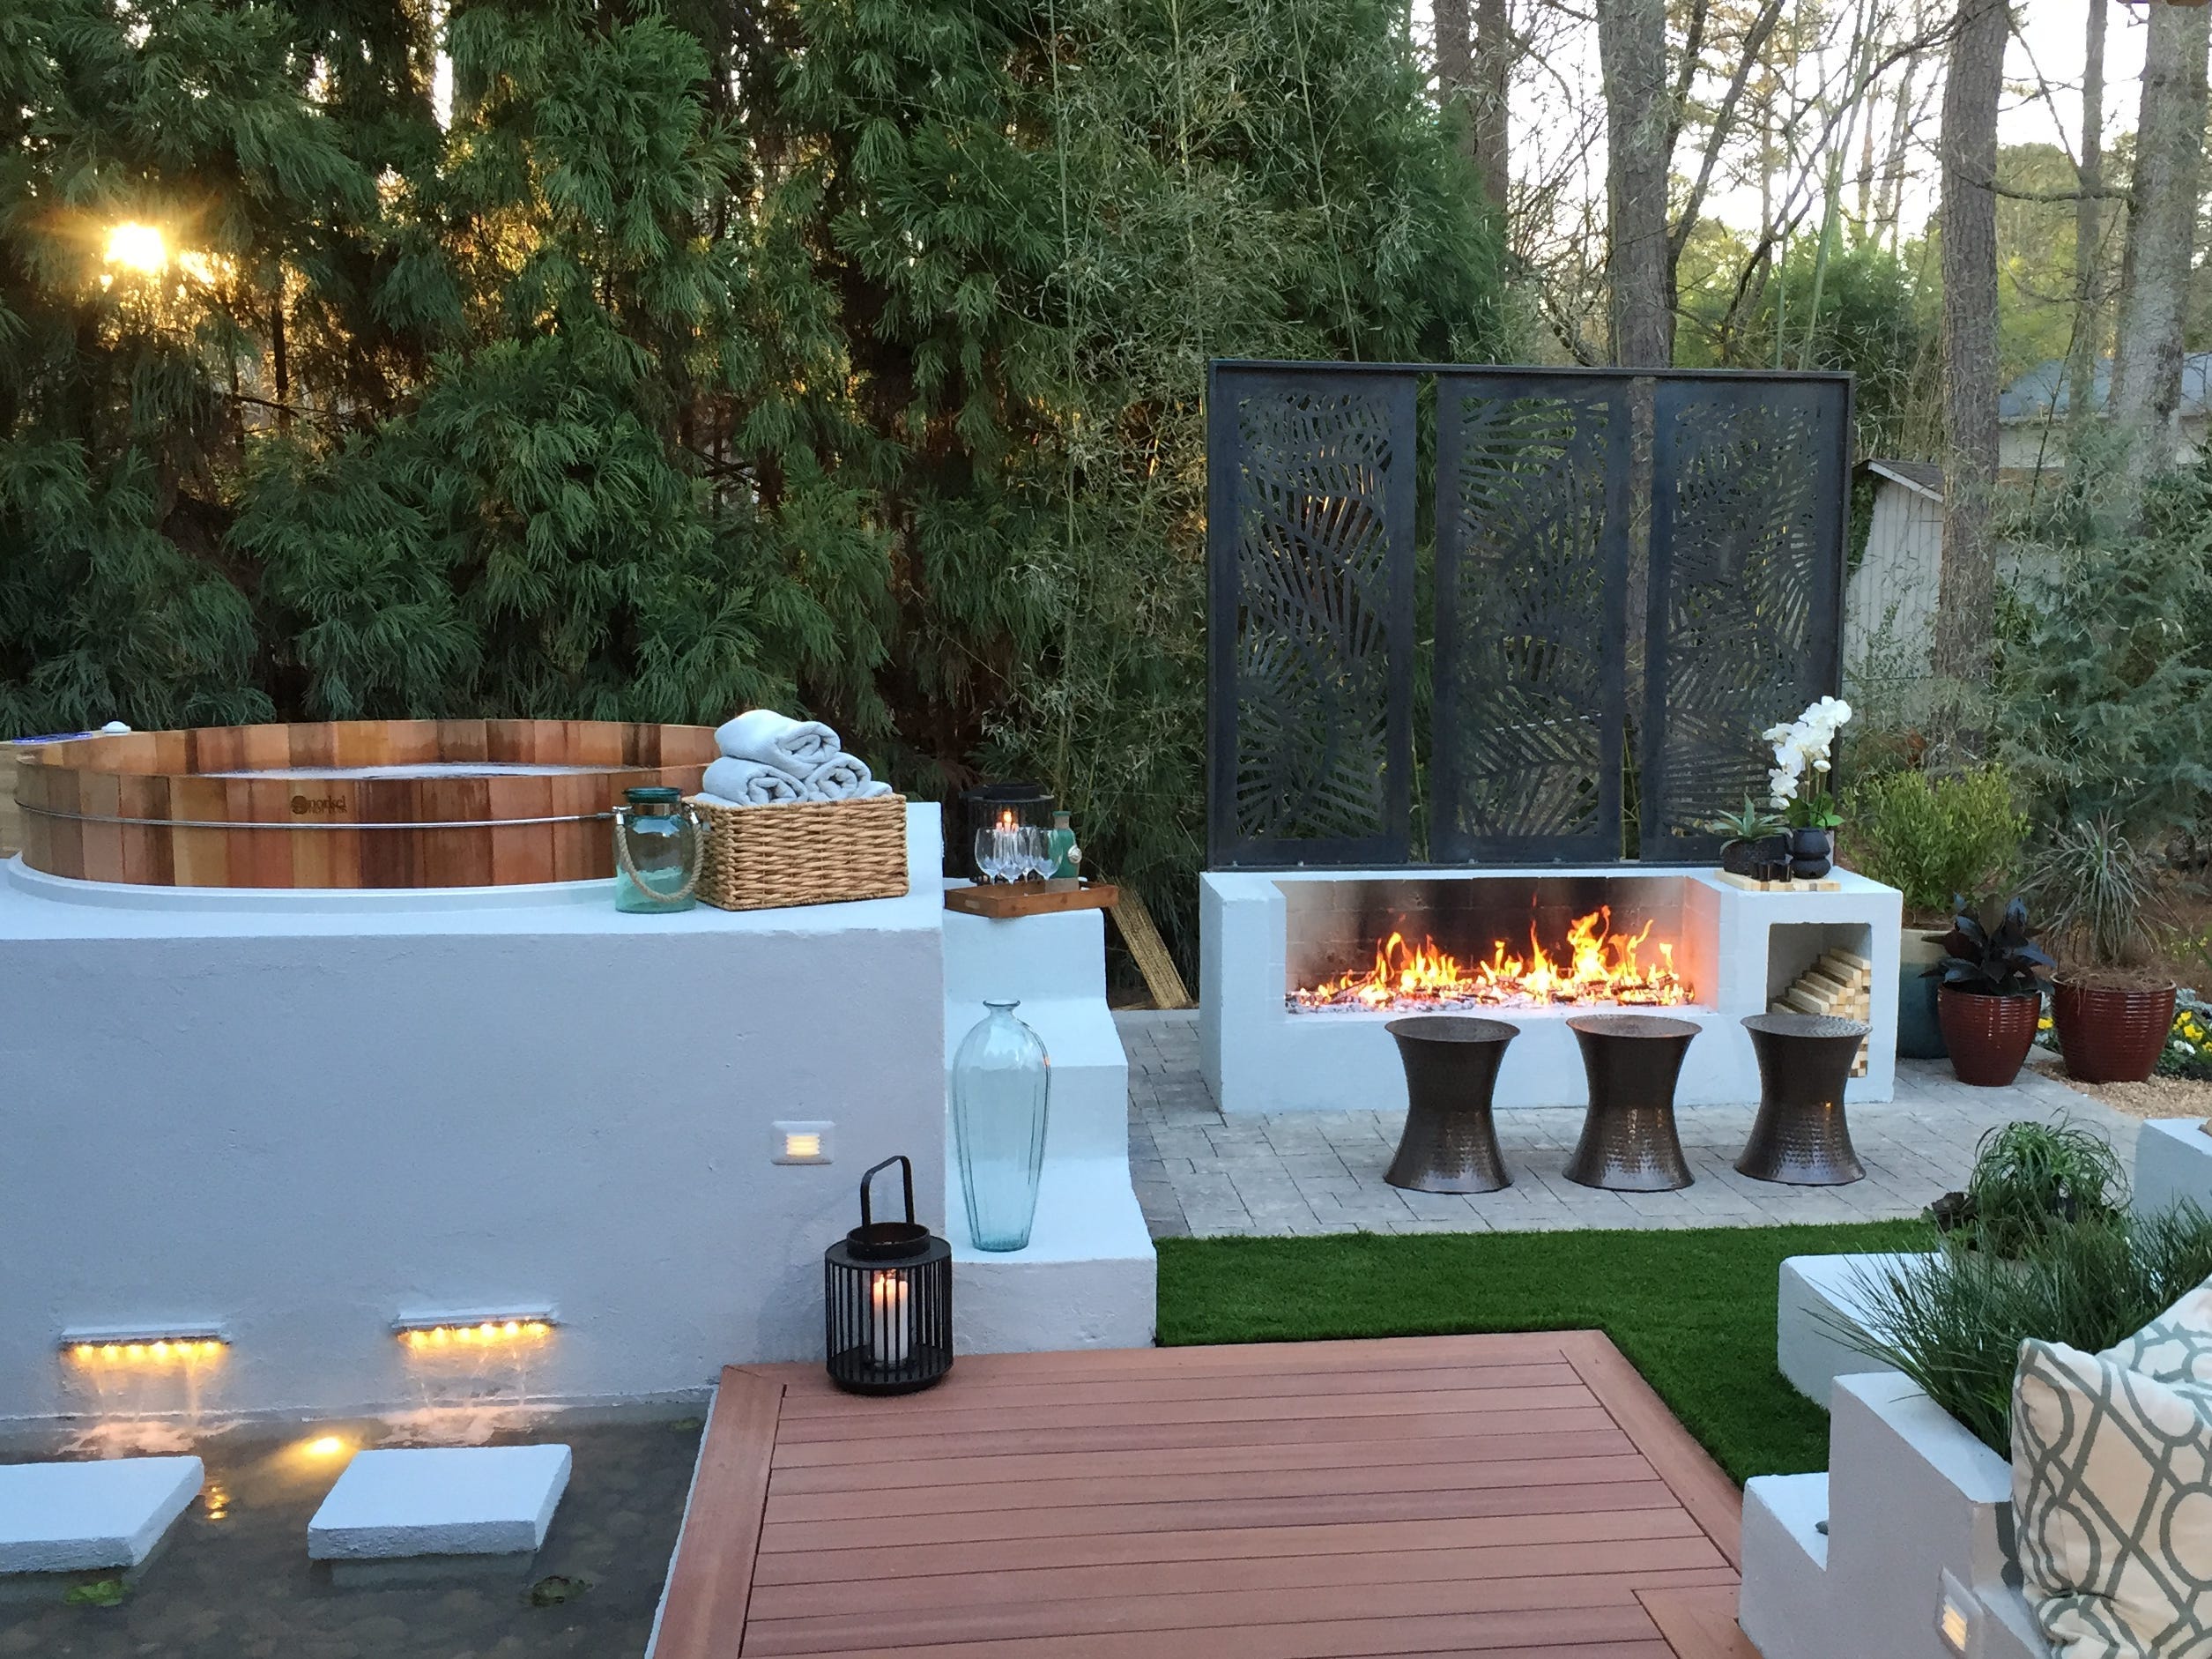 A luxury backyard with a hot tub, fire pit, and couch seating area